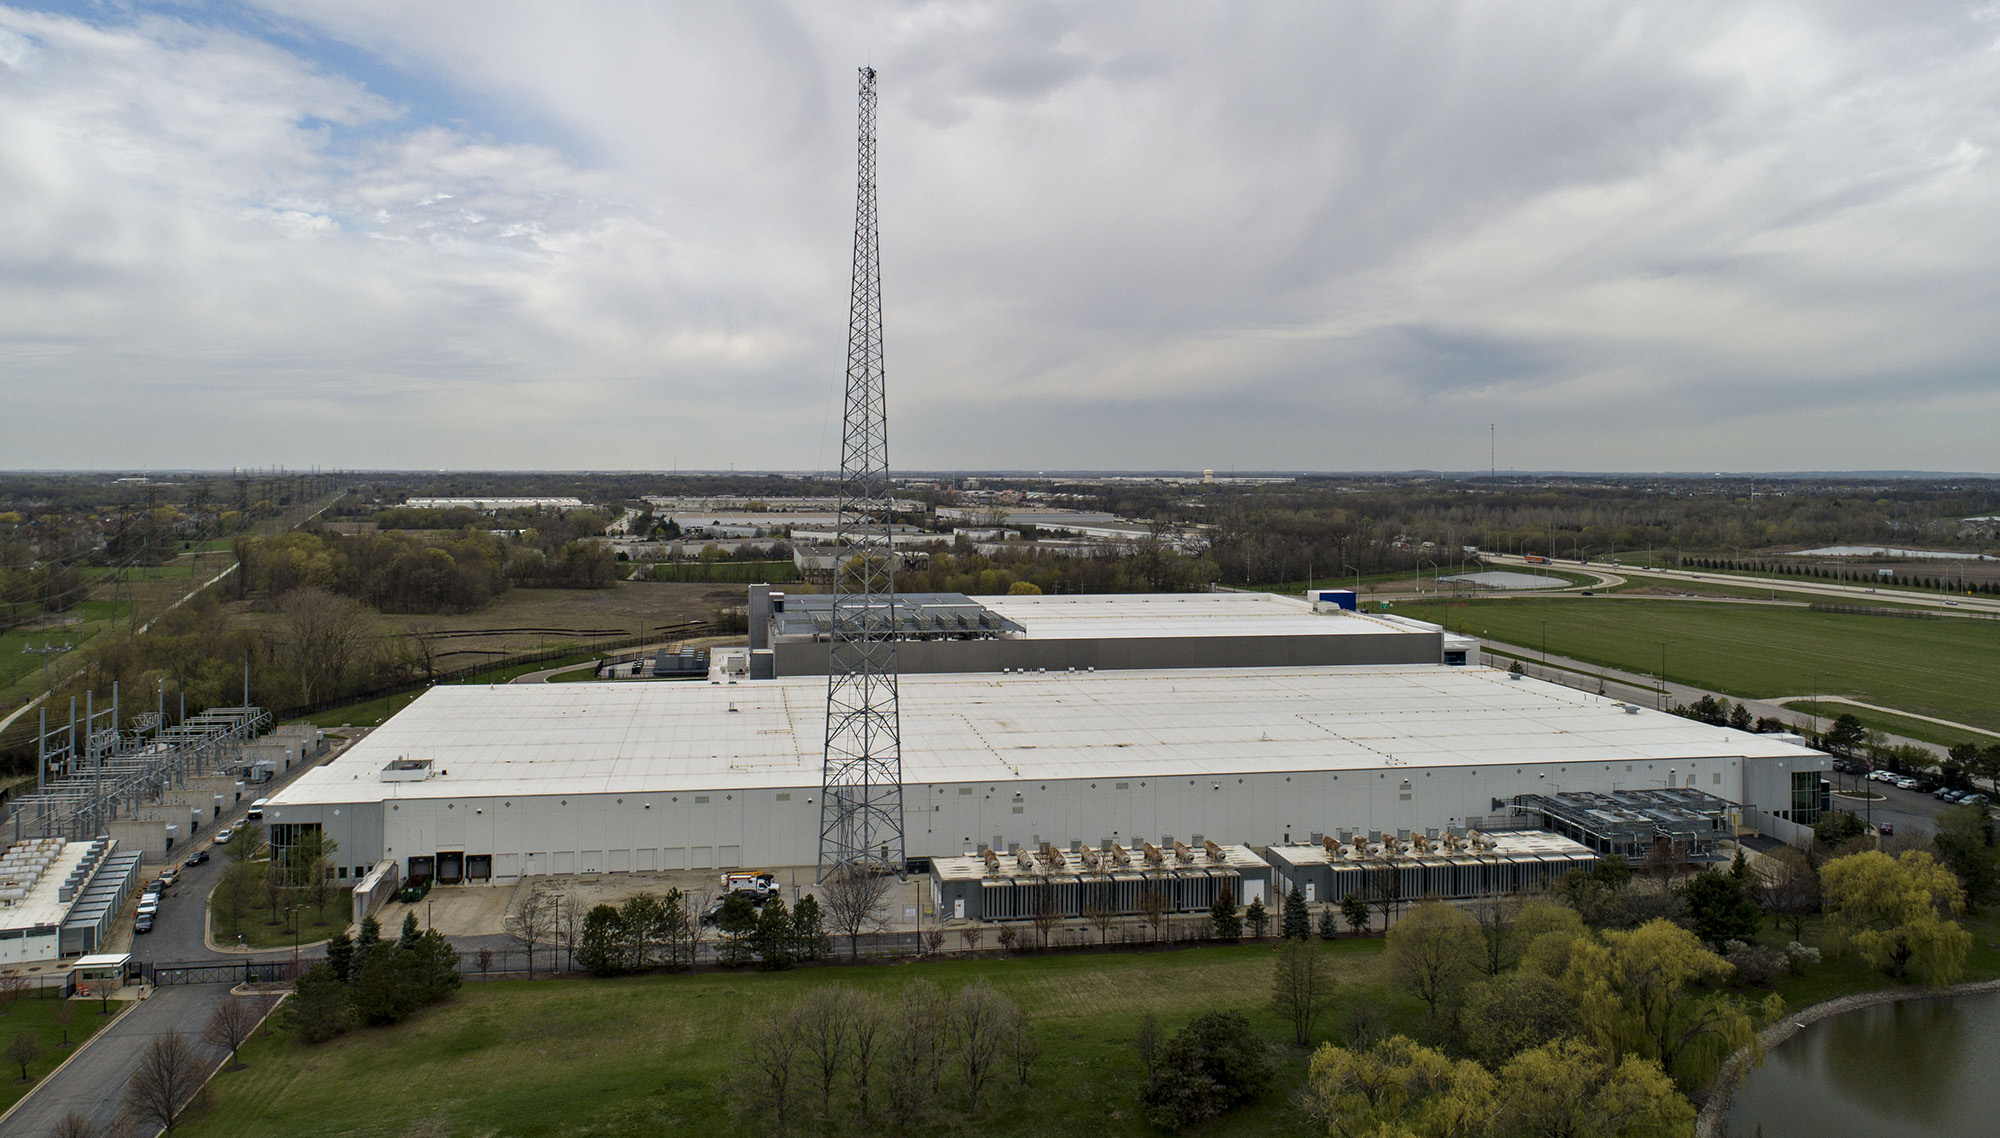 A 350-foot high-frequency trading tower stands outside the CyrusOne&nbsp;data center&nbsp;in Aurora, Illinois.